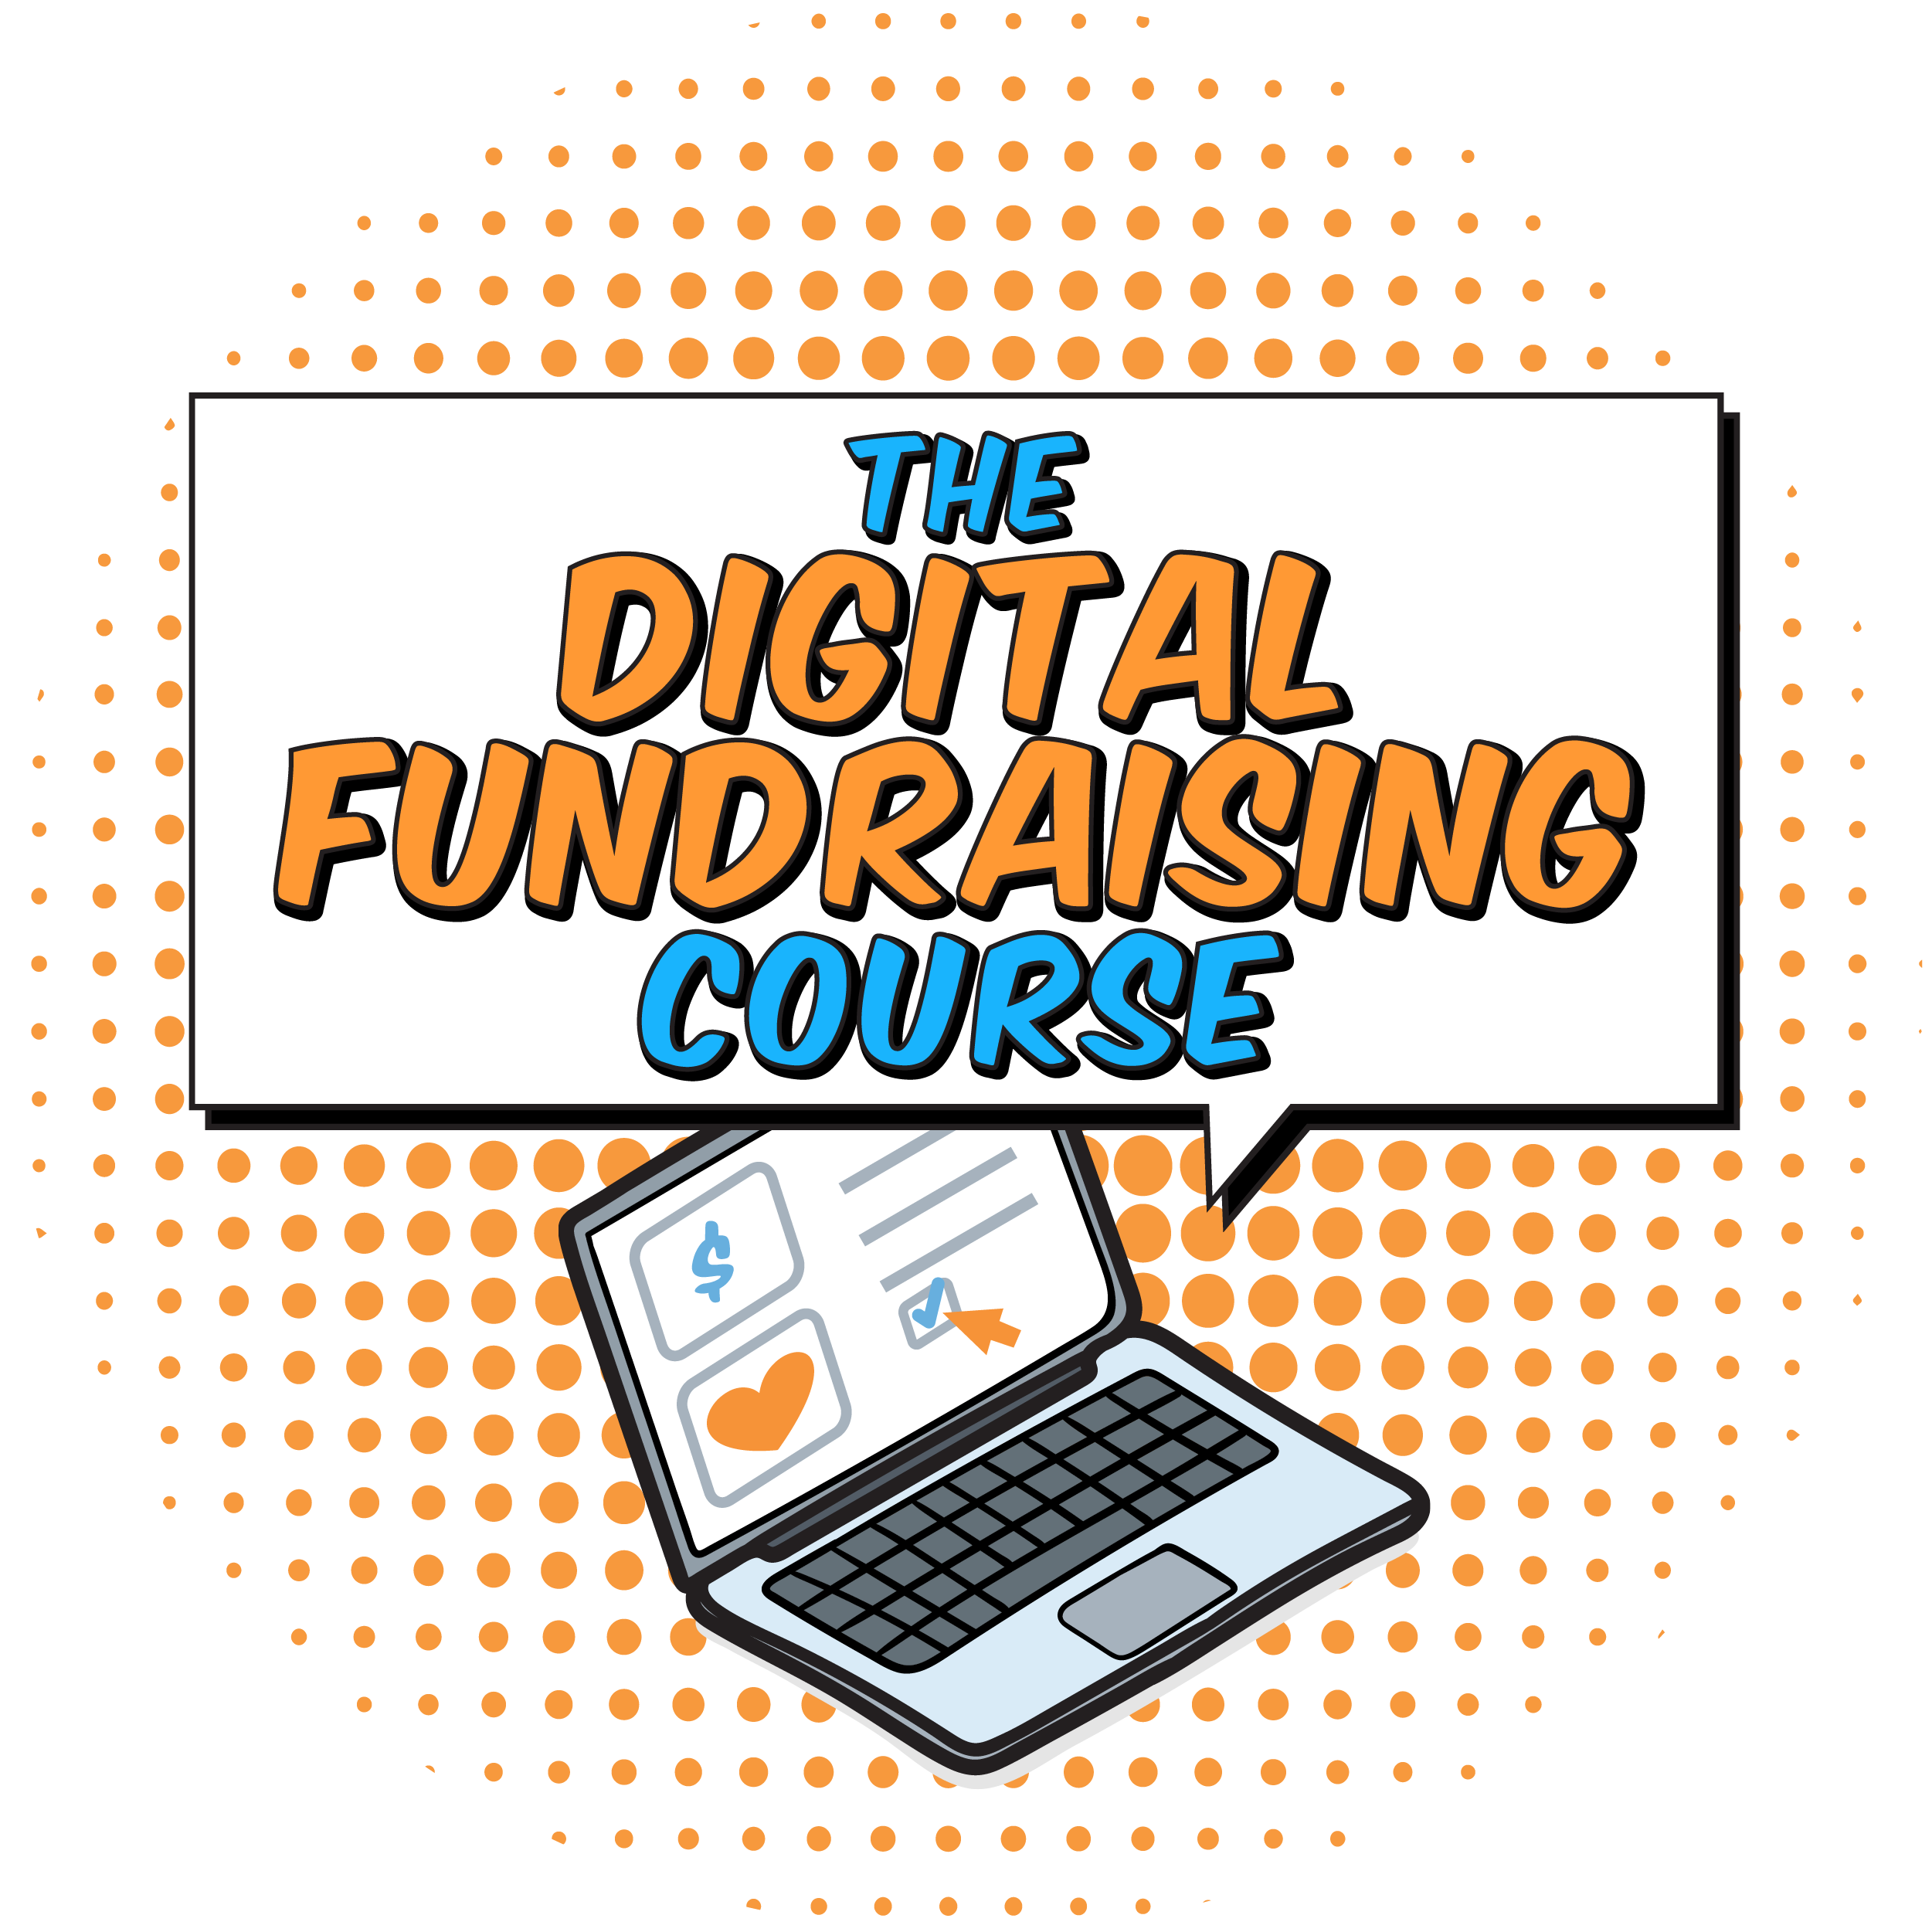 The Digital Fundraising Course